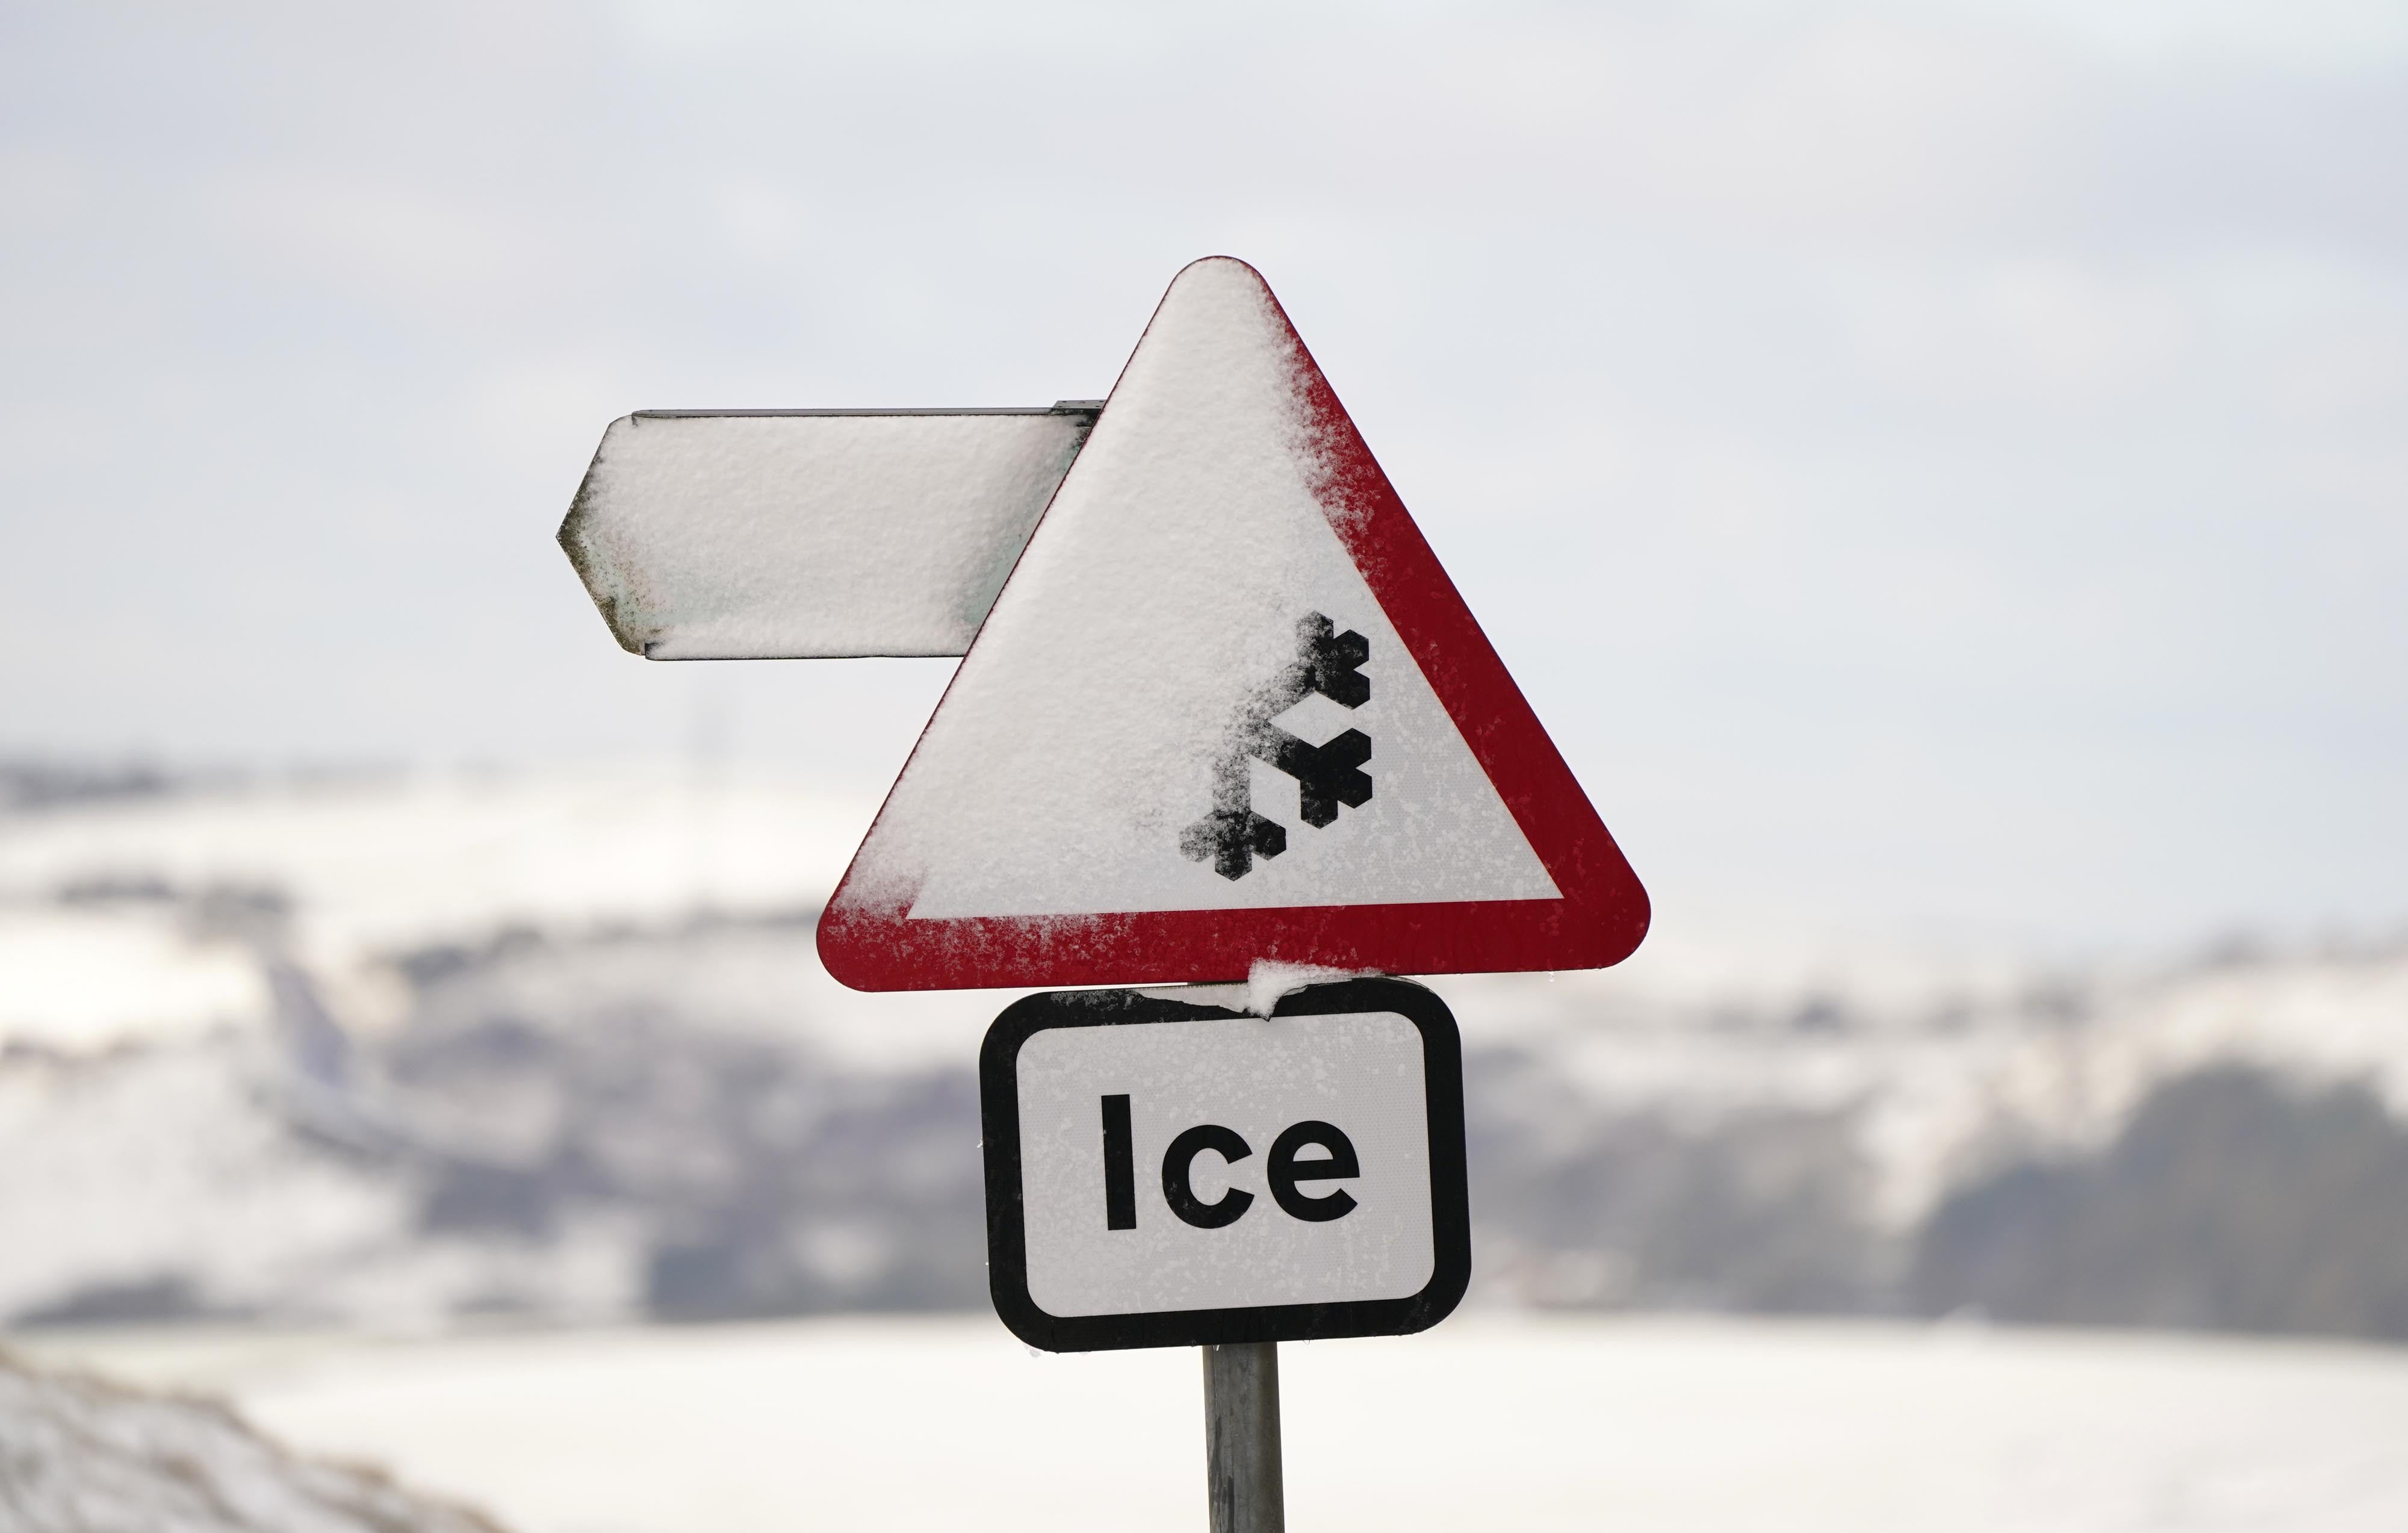 A yellow weather warning for ice has been issued